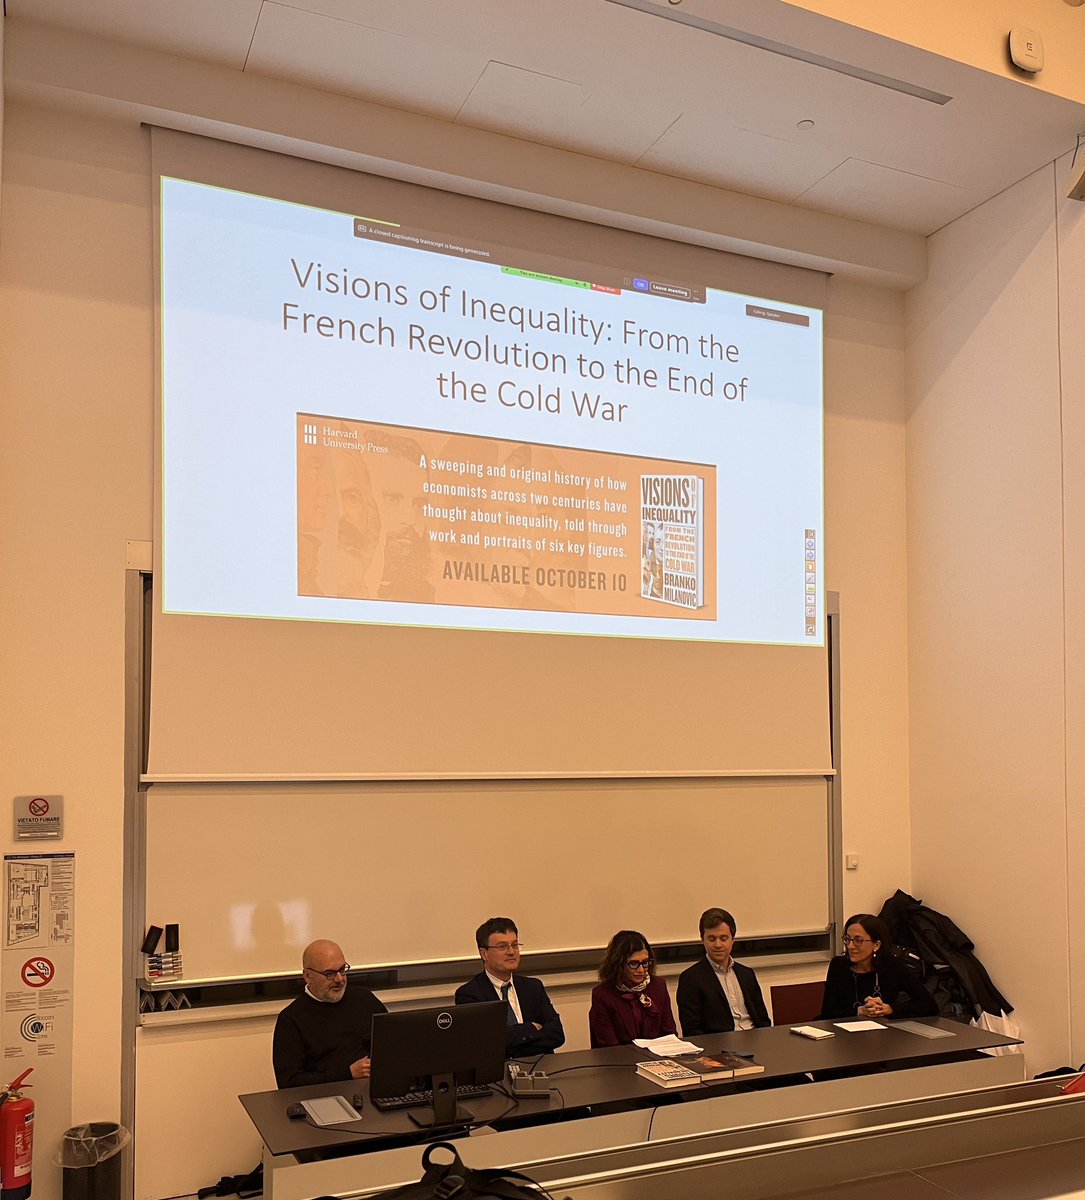 The round table “Inequality in Human Societies”  just started !!
Great presenters and discussants at @Unibocconi @DondenaCentre with @BrankoMilan @guido_alfani @ZParolin presenting their recent books!

#inequality #econhist